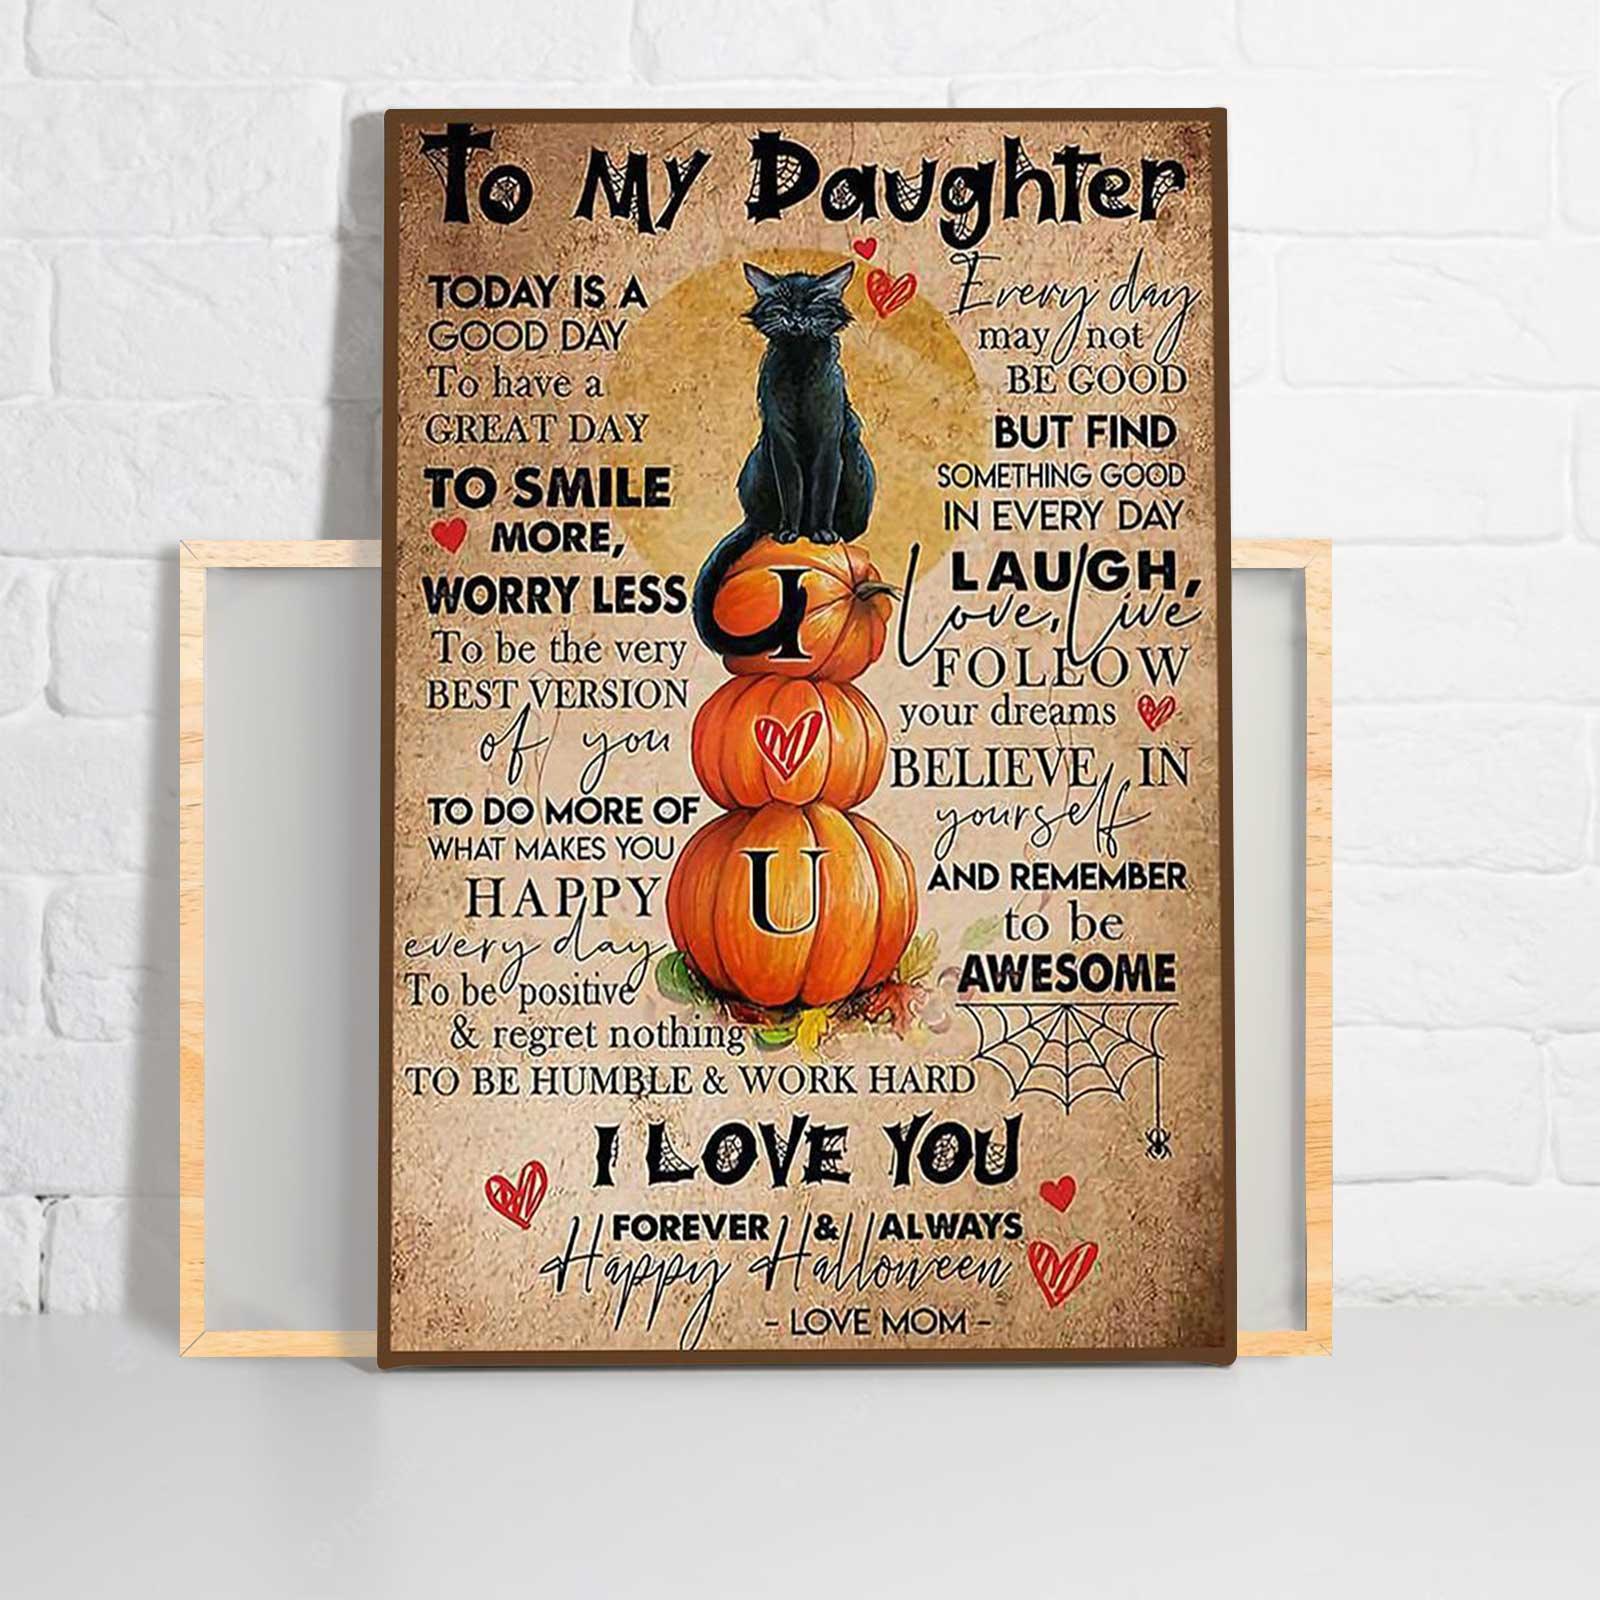 Black Cat Portrait Canvas - To My Daughter Canvas, Black Cat Halloween, I Love You Forever & Always - Perfect Gift For Black Cat Lovers, Cat Lovers - Amzanimalsgift